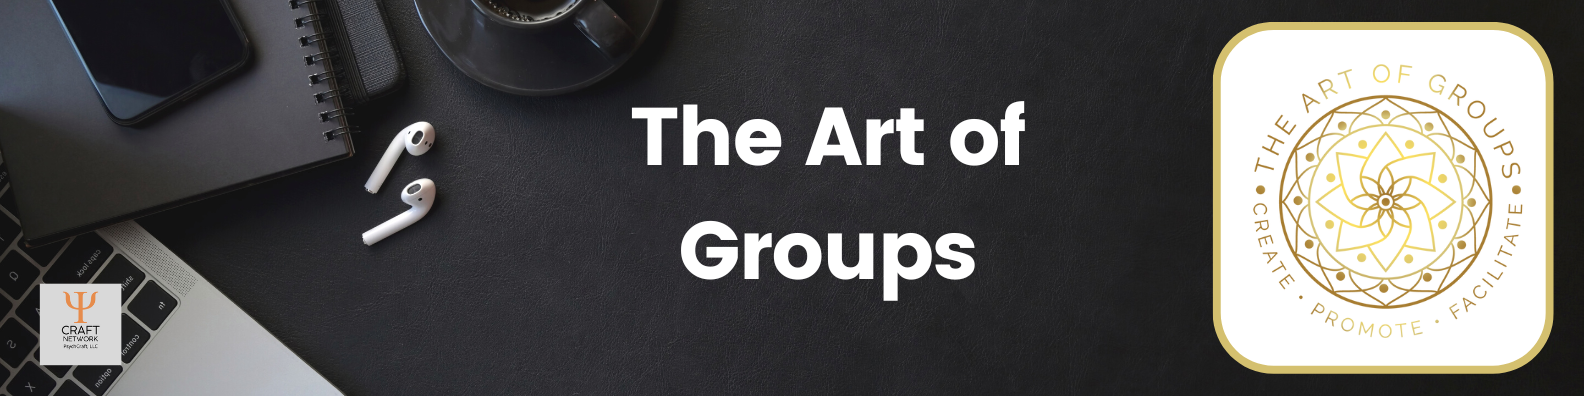 The Art of Groups